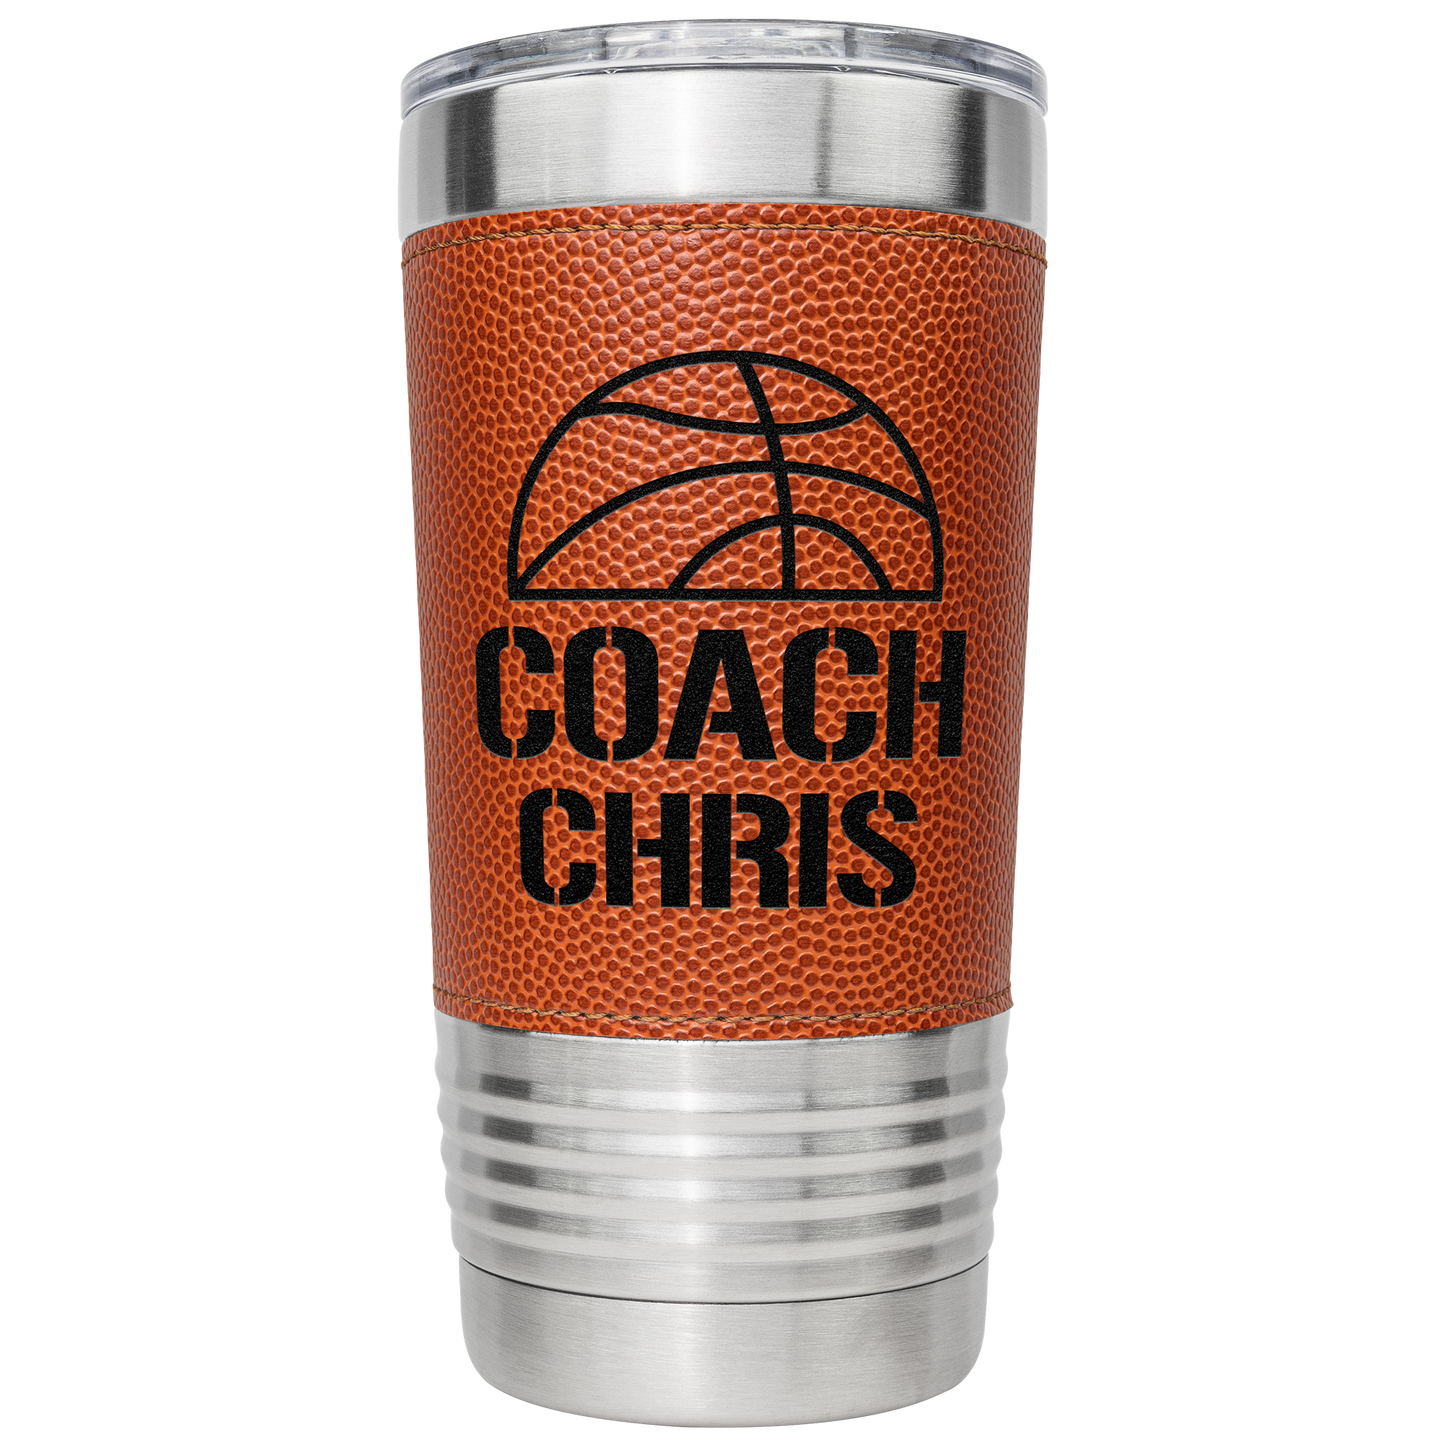 Personalized Basketball Coach 20 oz Engraved Stainless Steel Tumbler